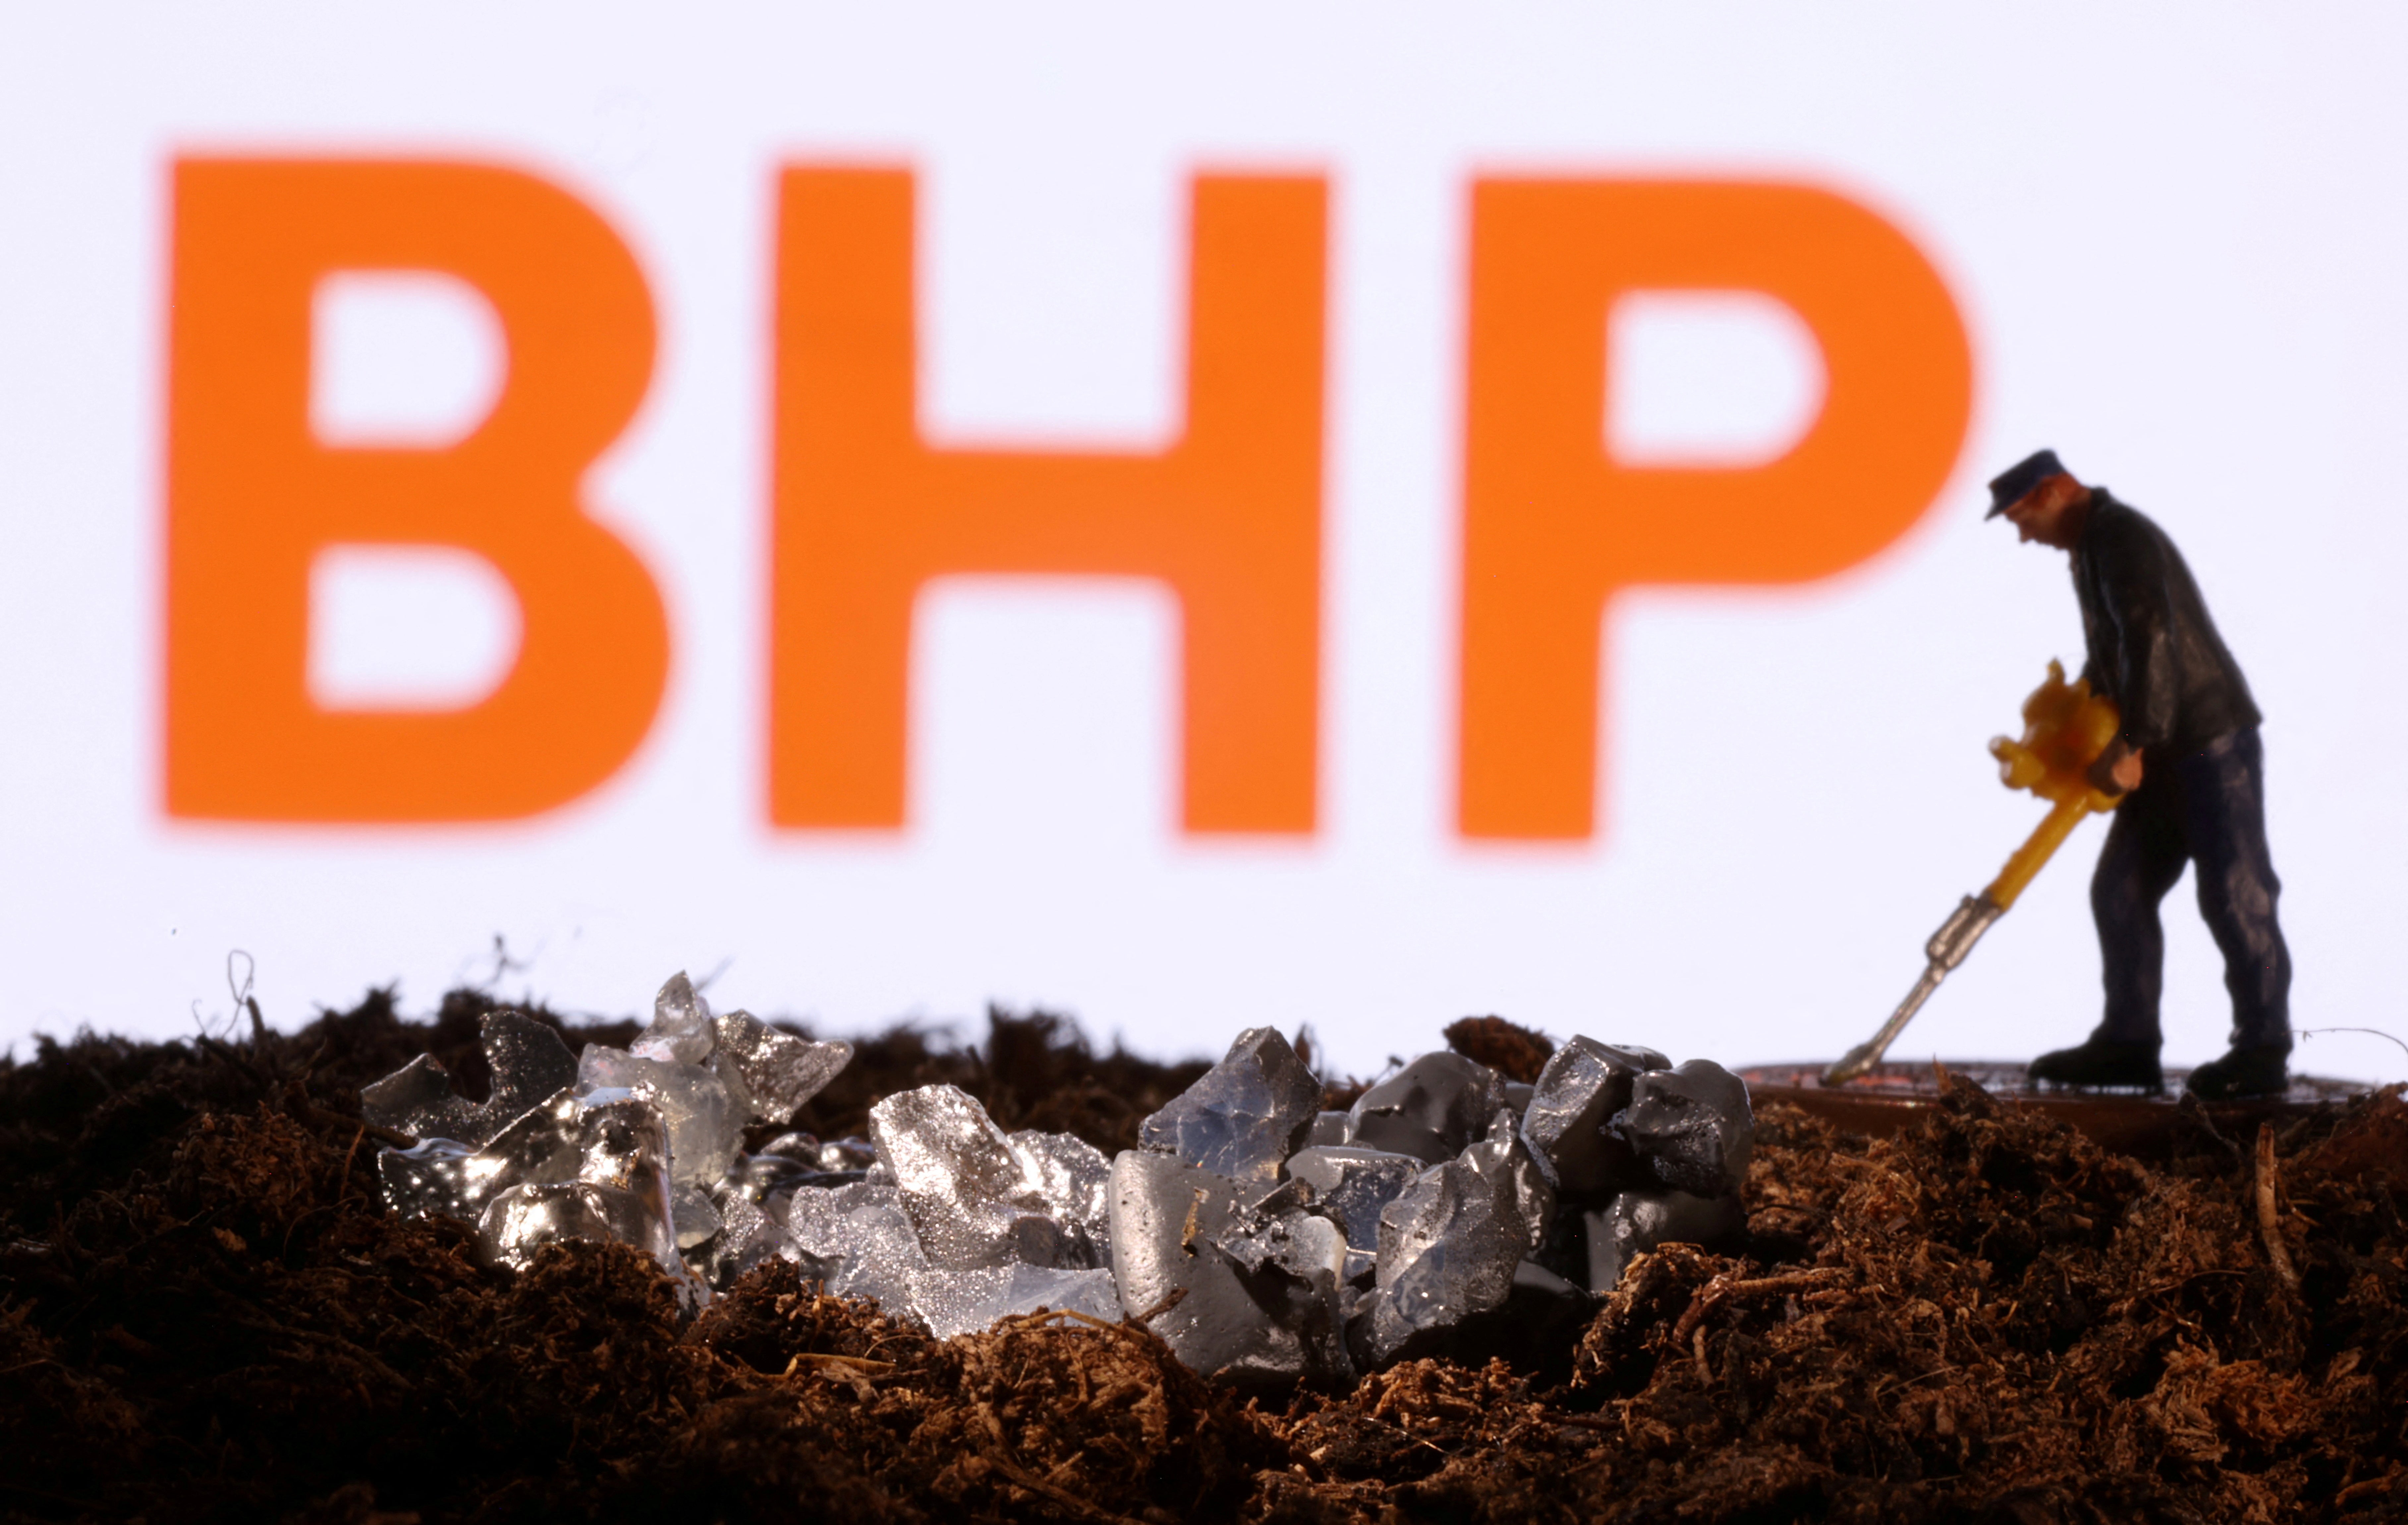 This case isn’t just about BHP and this disaster